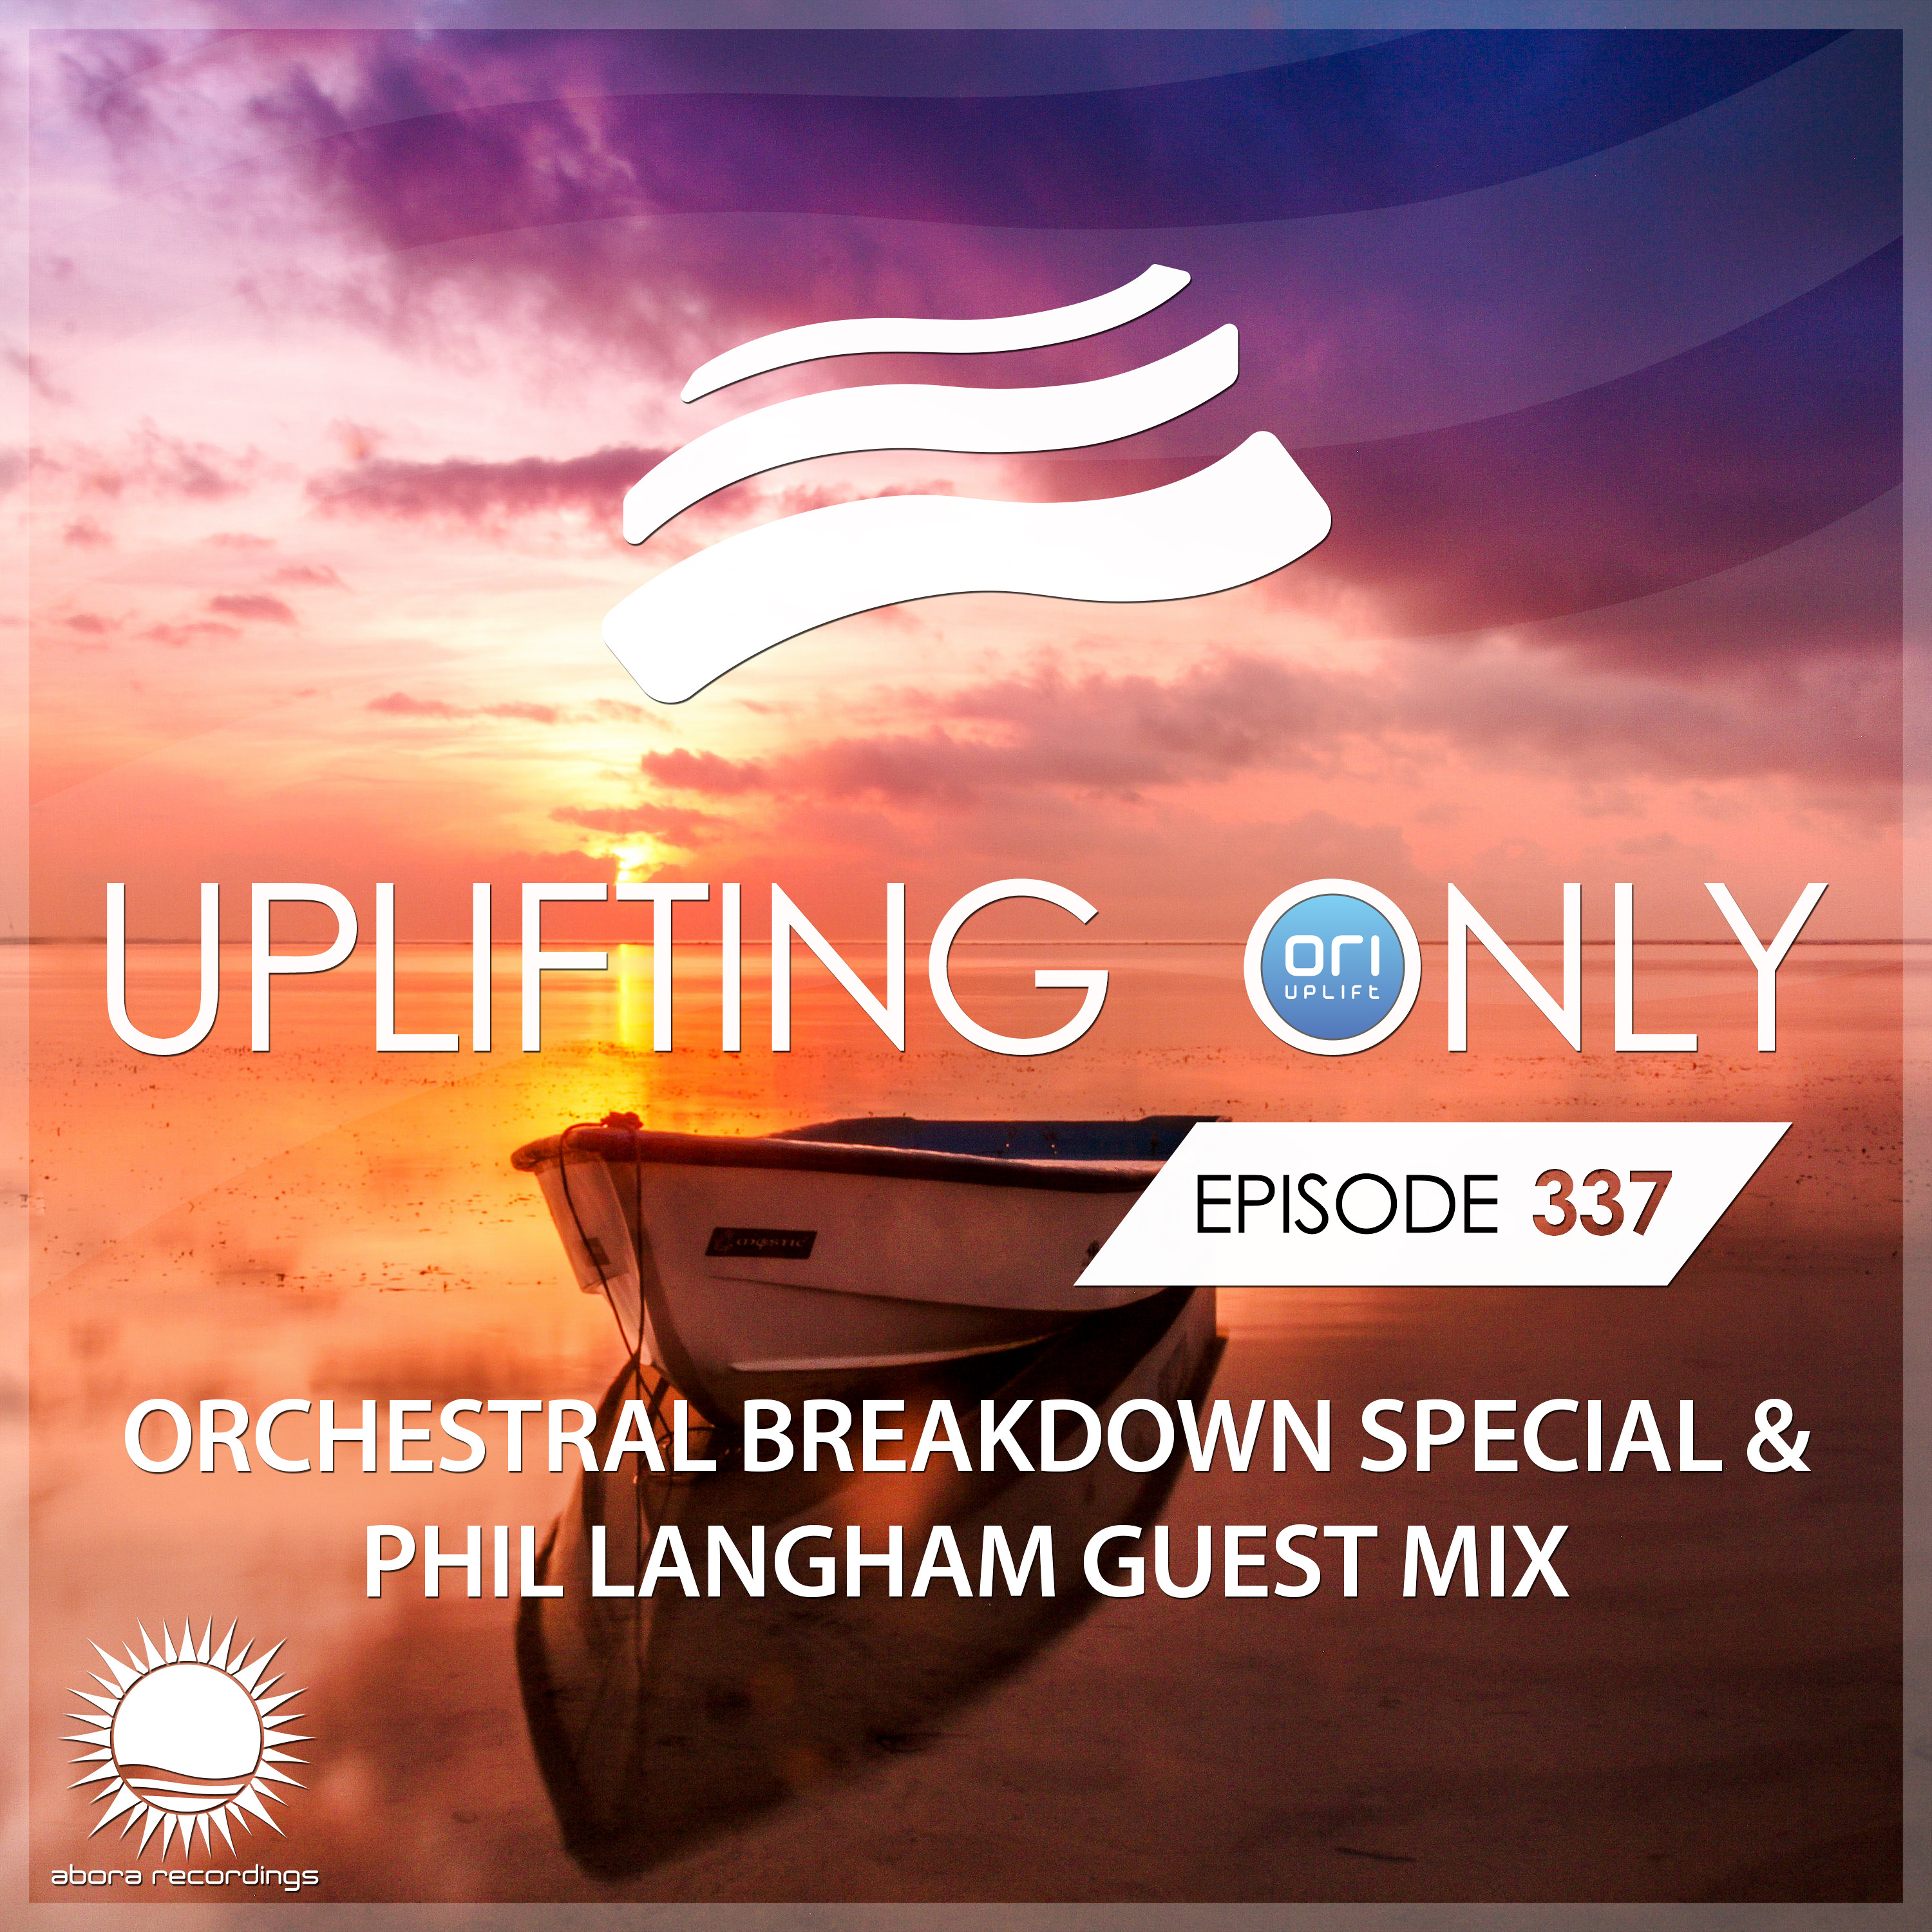 Uplifting Only 337 - Orchestral Breakdown Special (July 25, 2019) (incl. Phil Langham Guestmix)